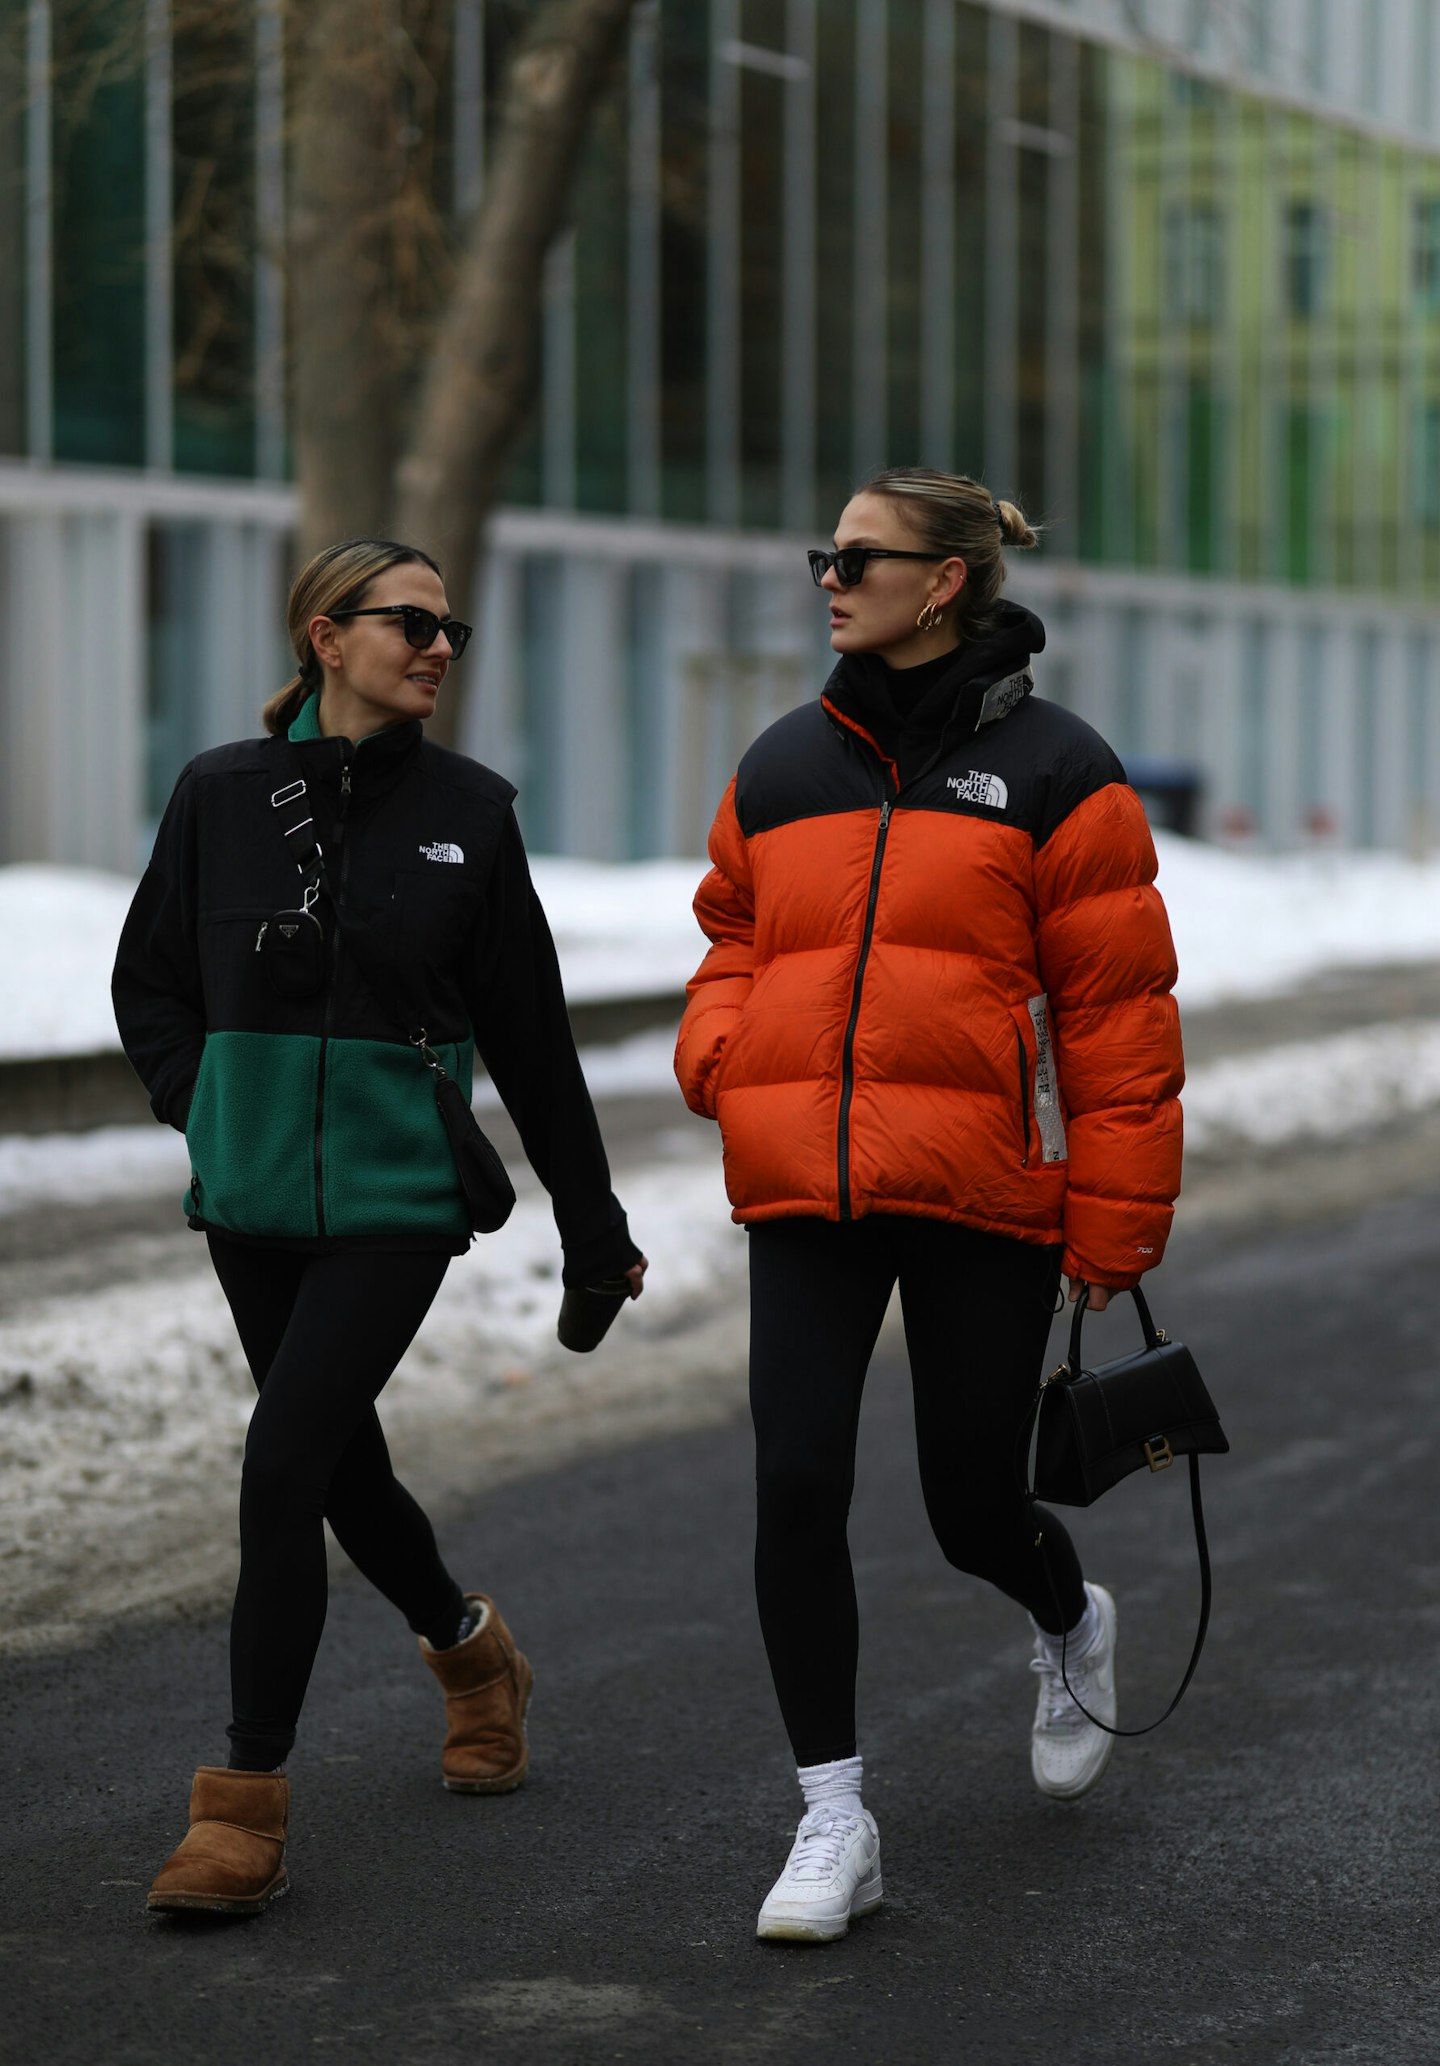 Street style wearing The North Face jacket